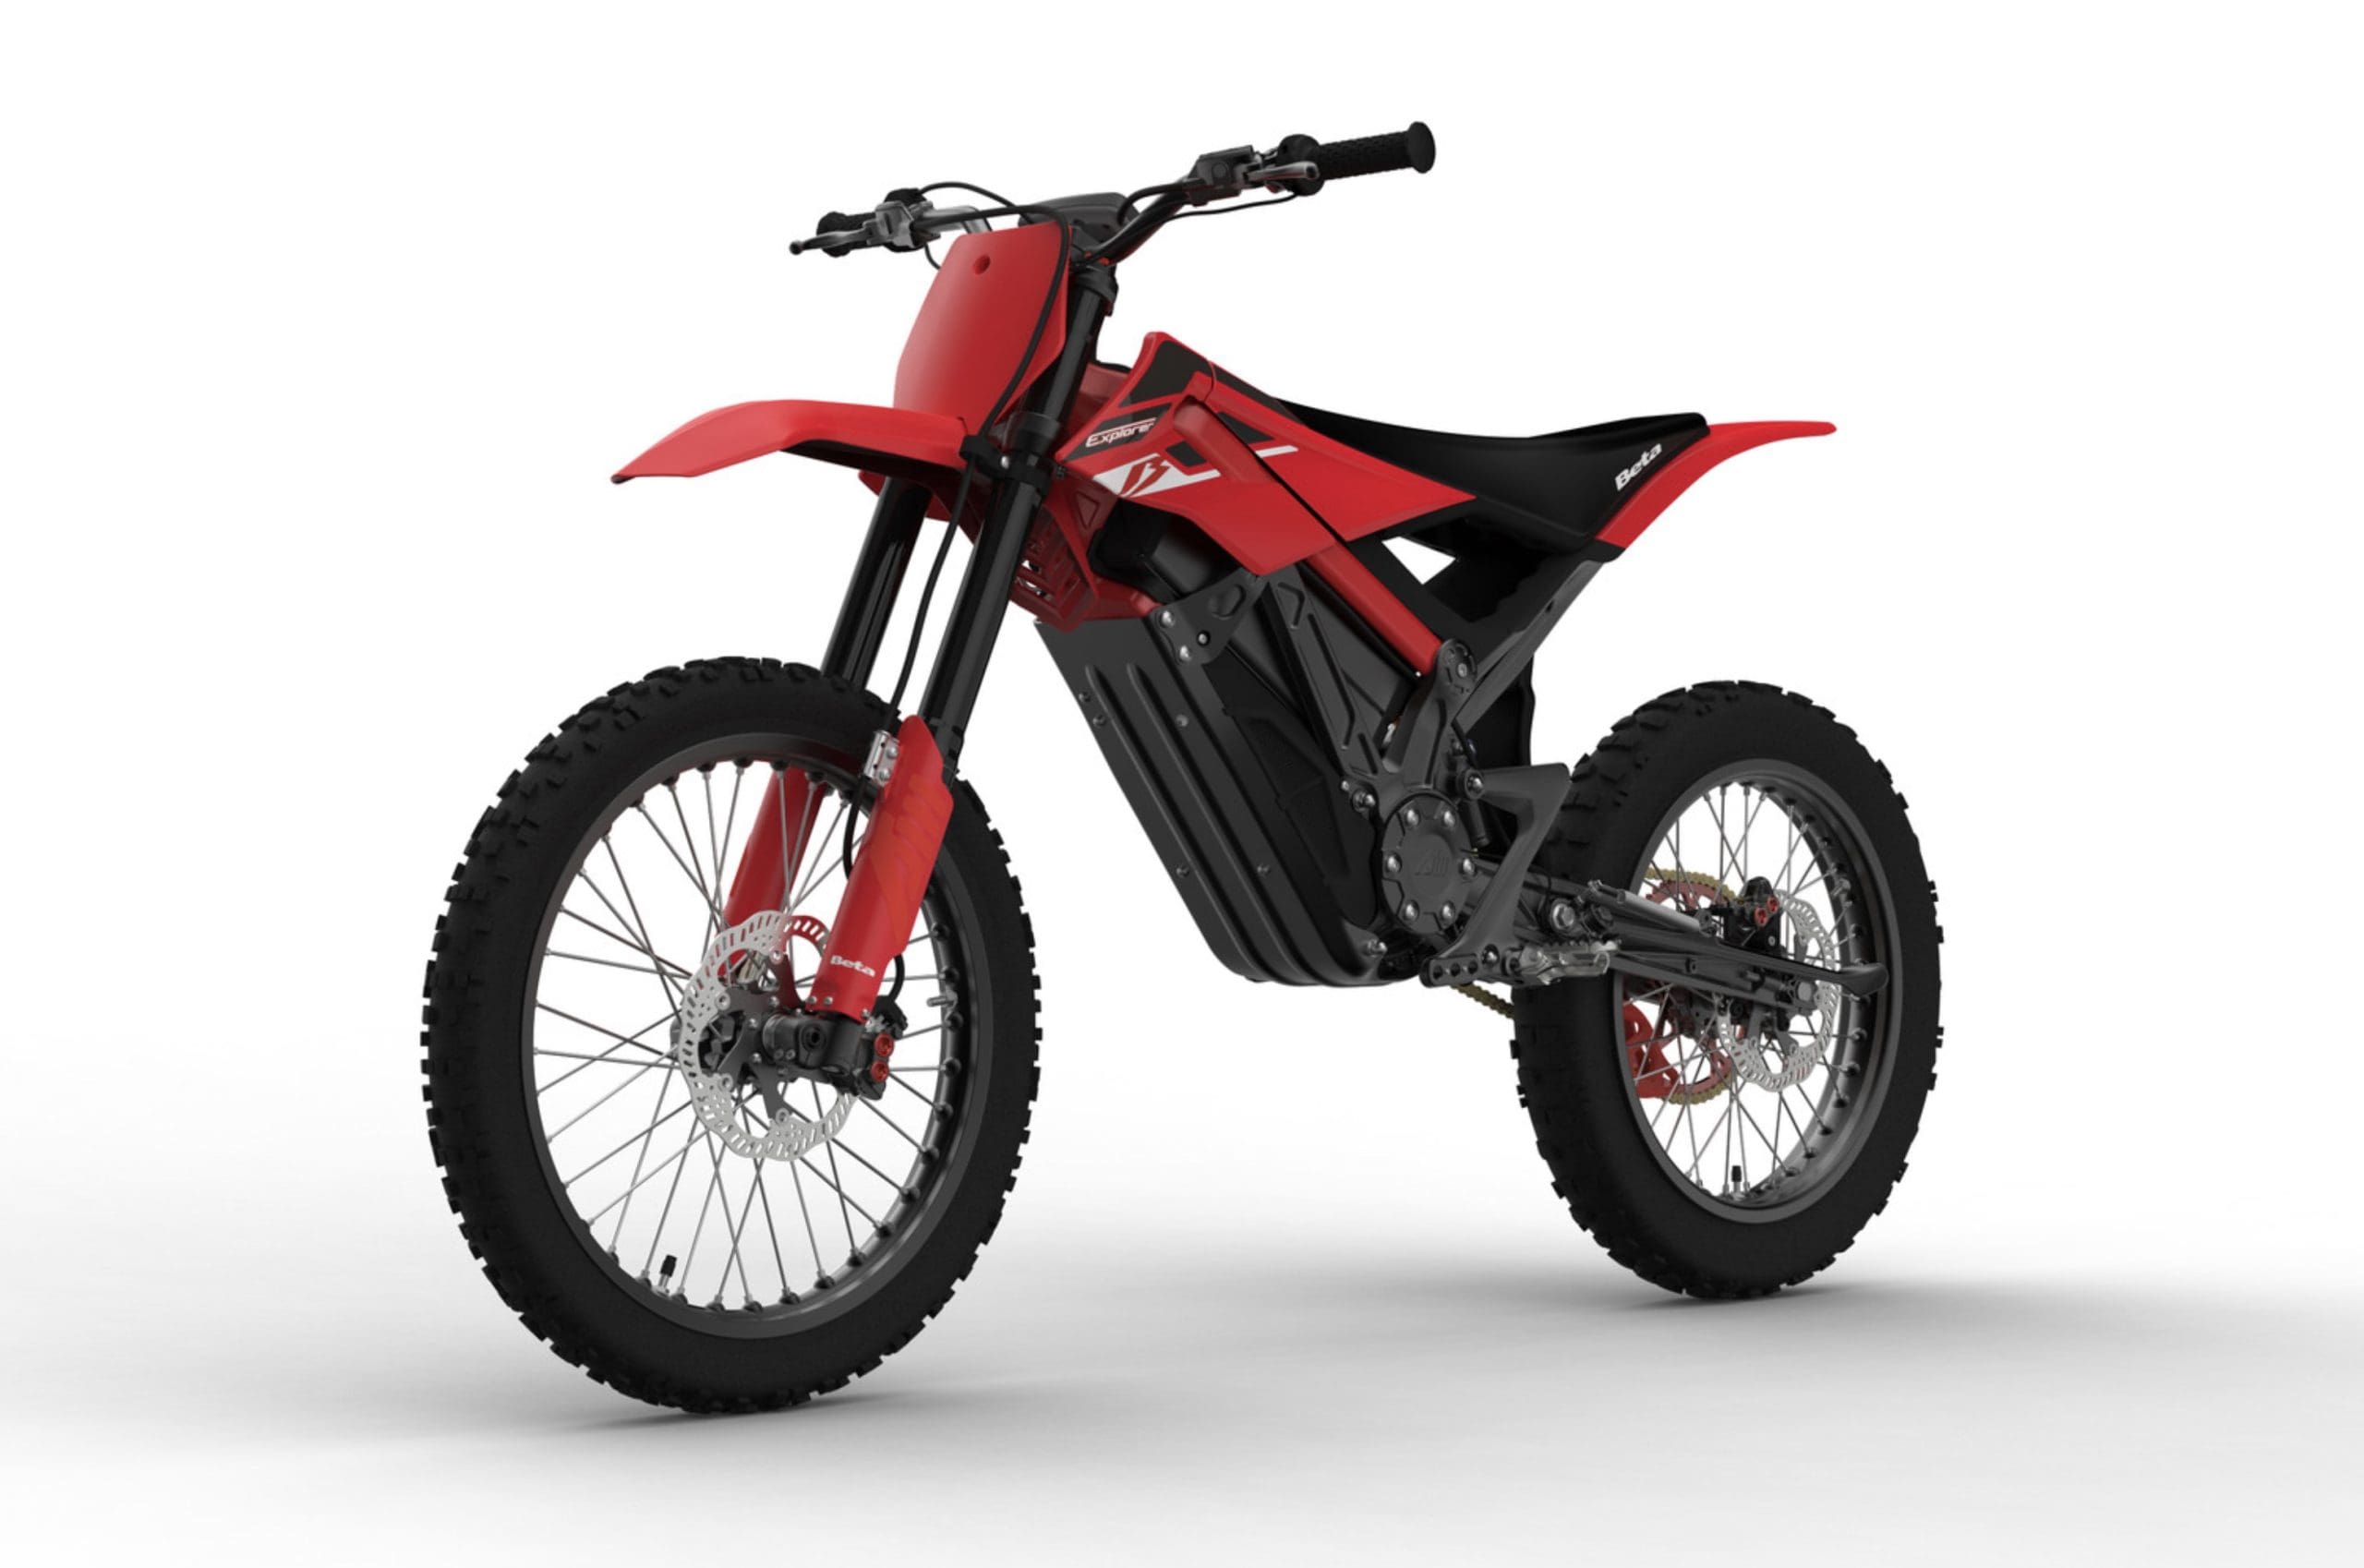 Beta USA's Explorer - an electric off-roading motorcycle, and the company's first electric offering for topography beyond the asphalt. Media sourced from Beta USA.